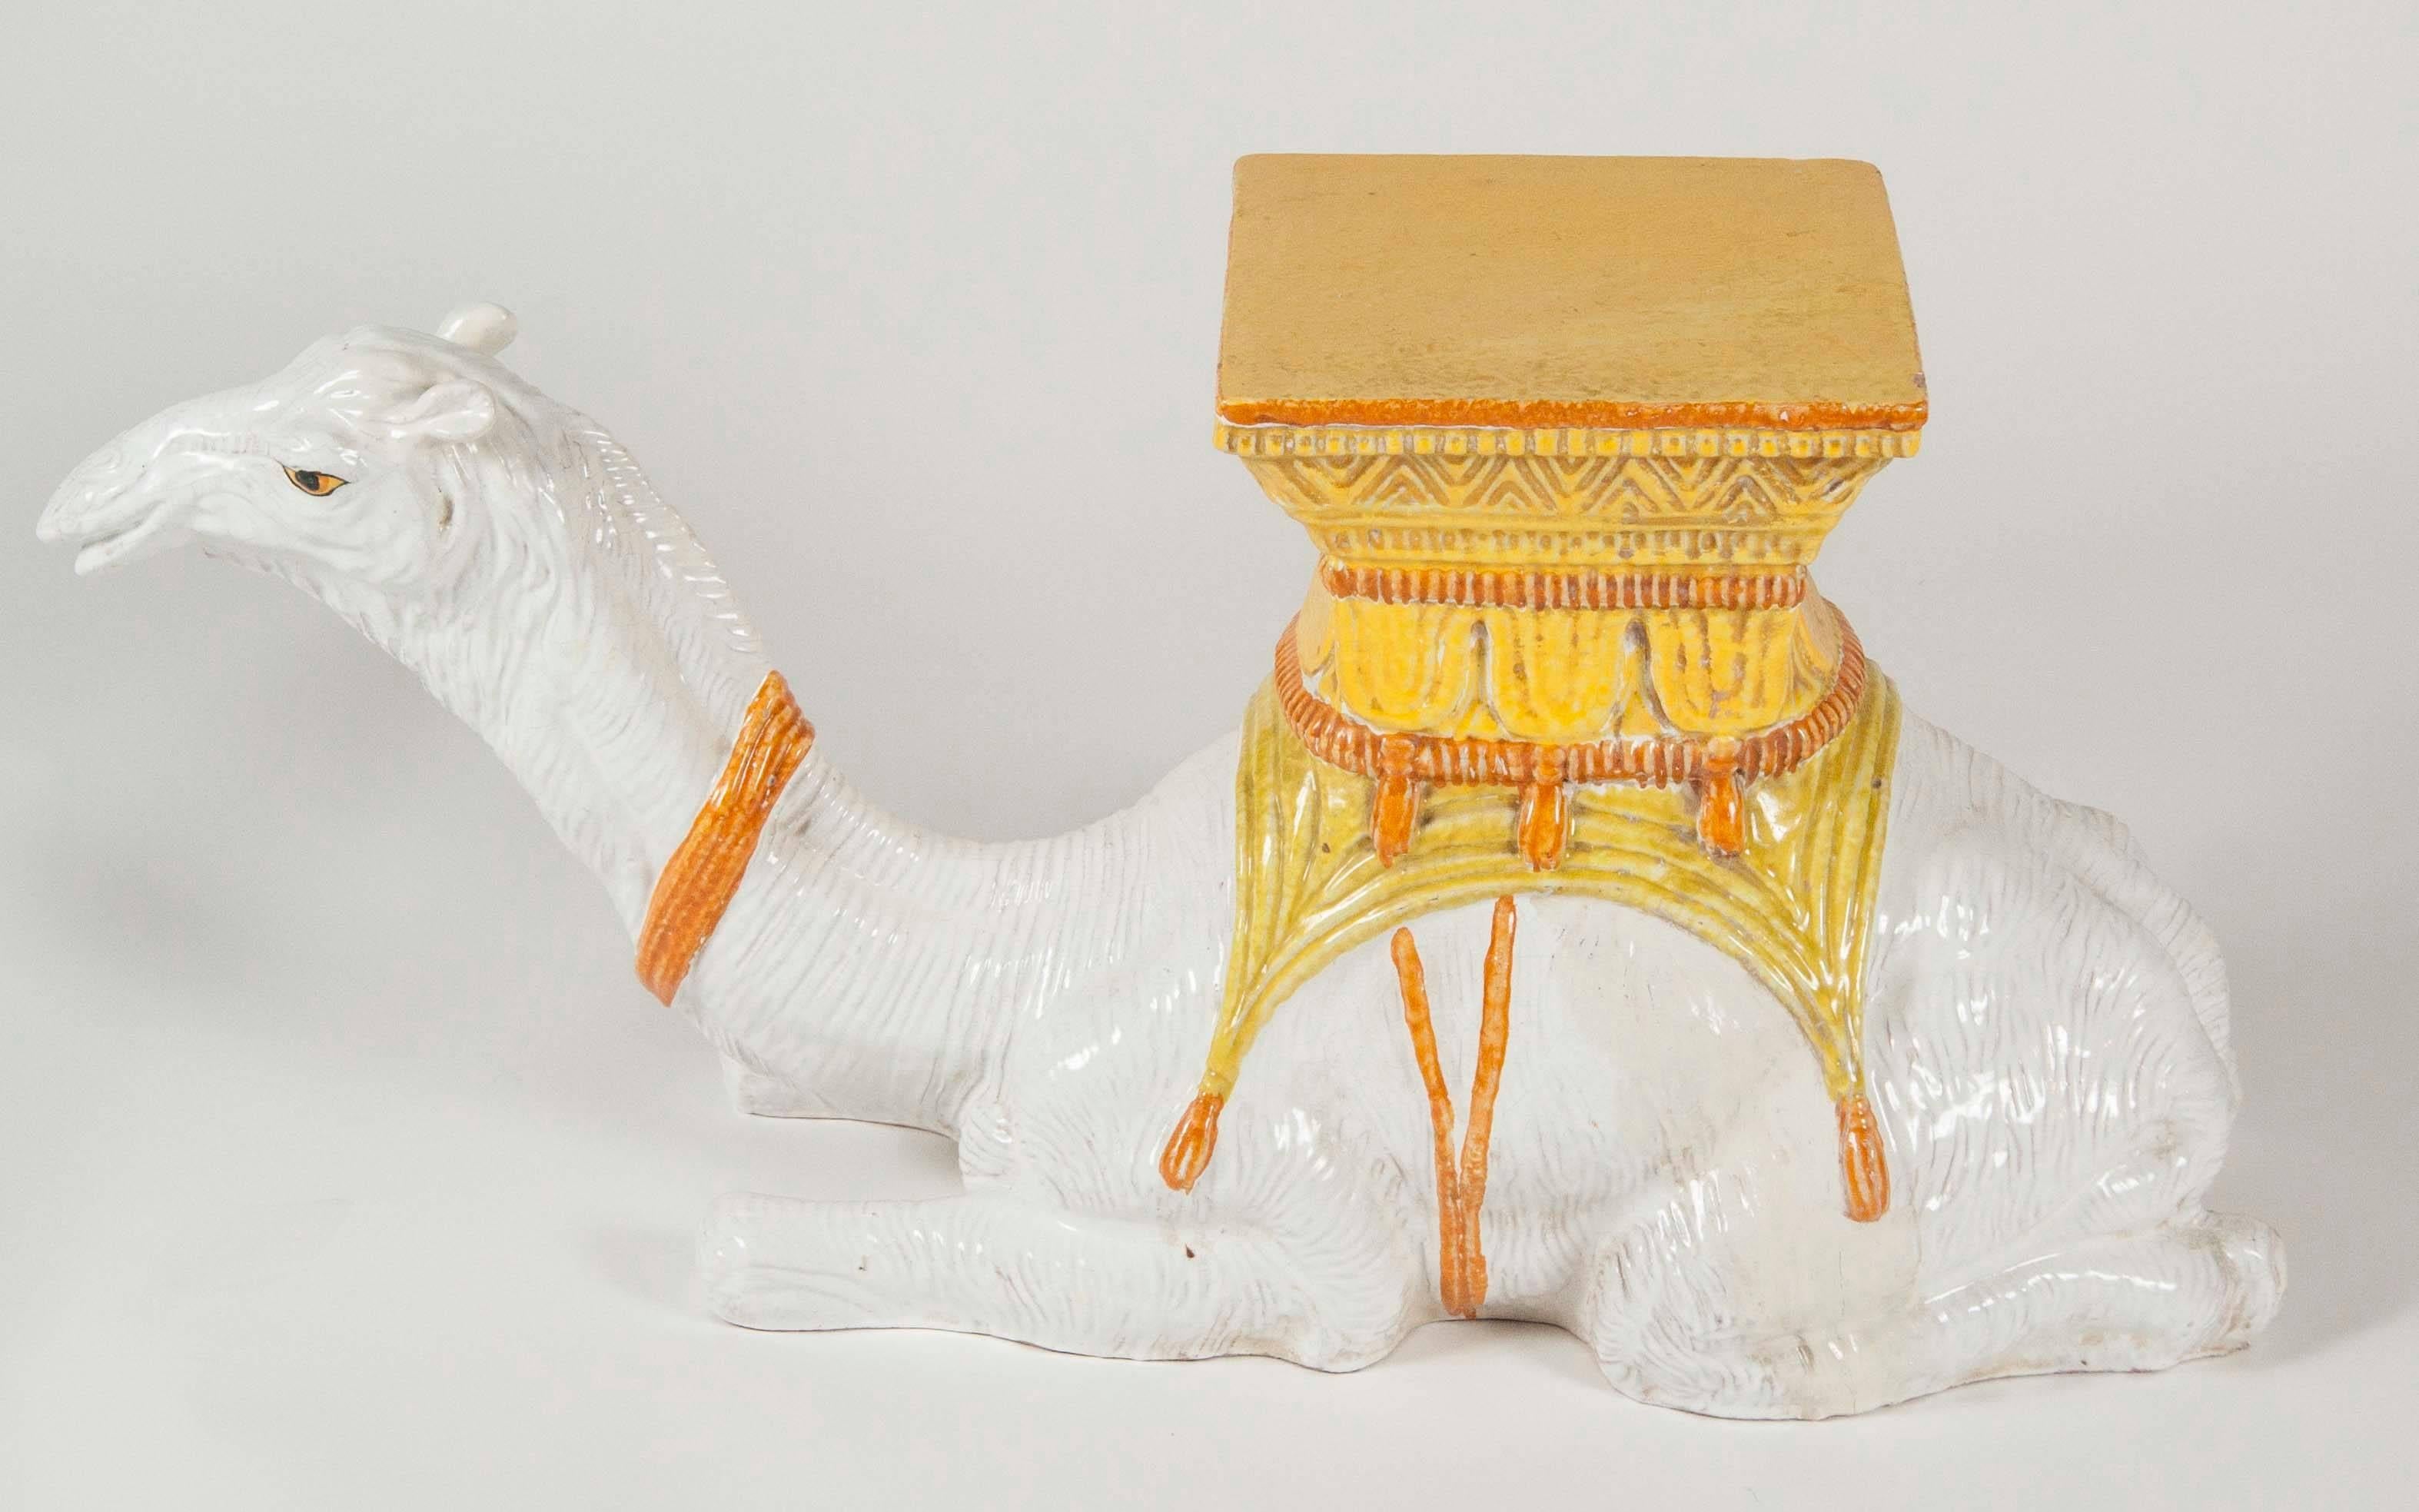 A vintage Italian ceramic garden seat in the shape of a camel.